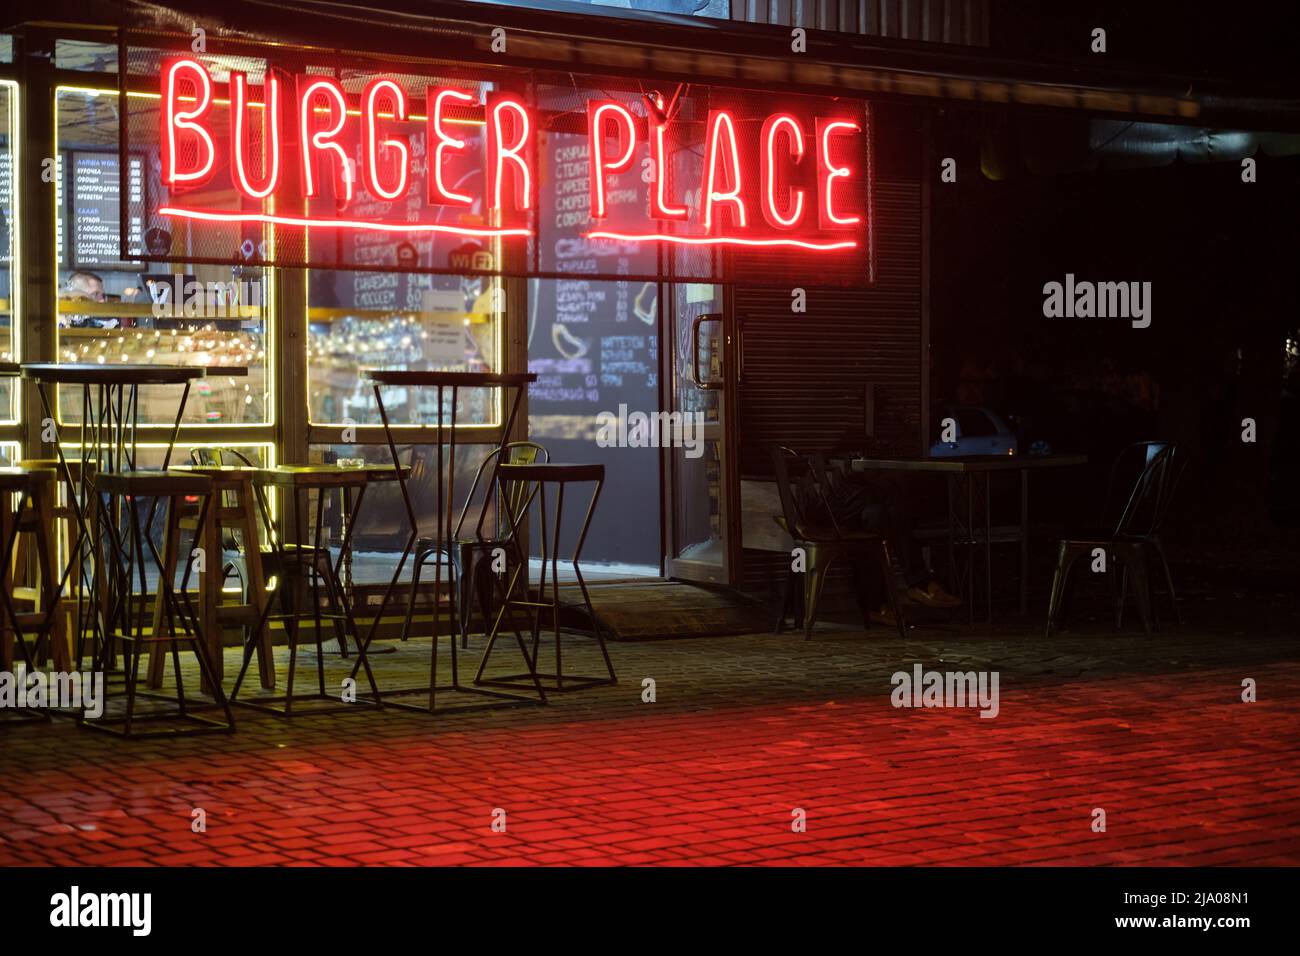 burger place, restaurant sign in red neon letters, Copy free space for logo, text Stock Photo